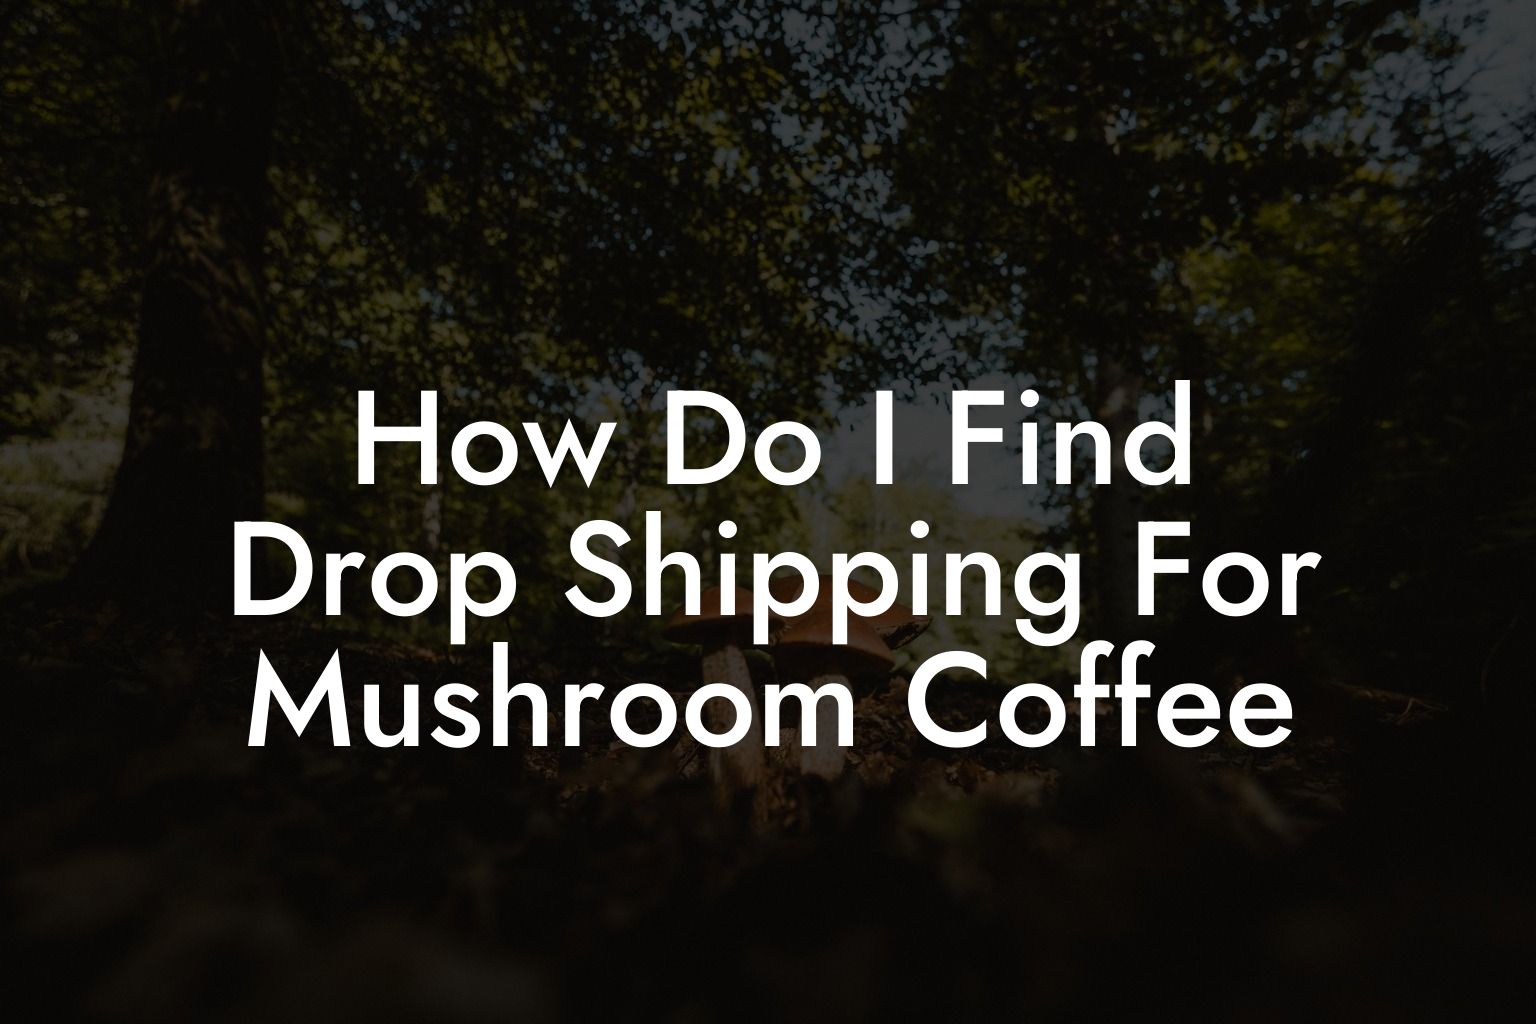 How Do I Find Drop Shipping For Mushroom Coffee